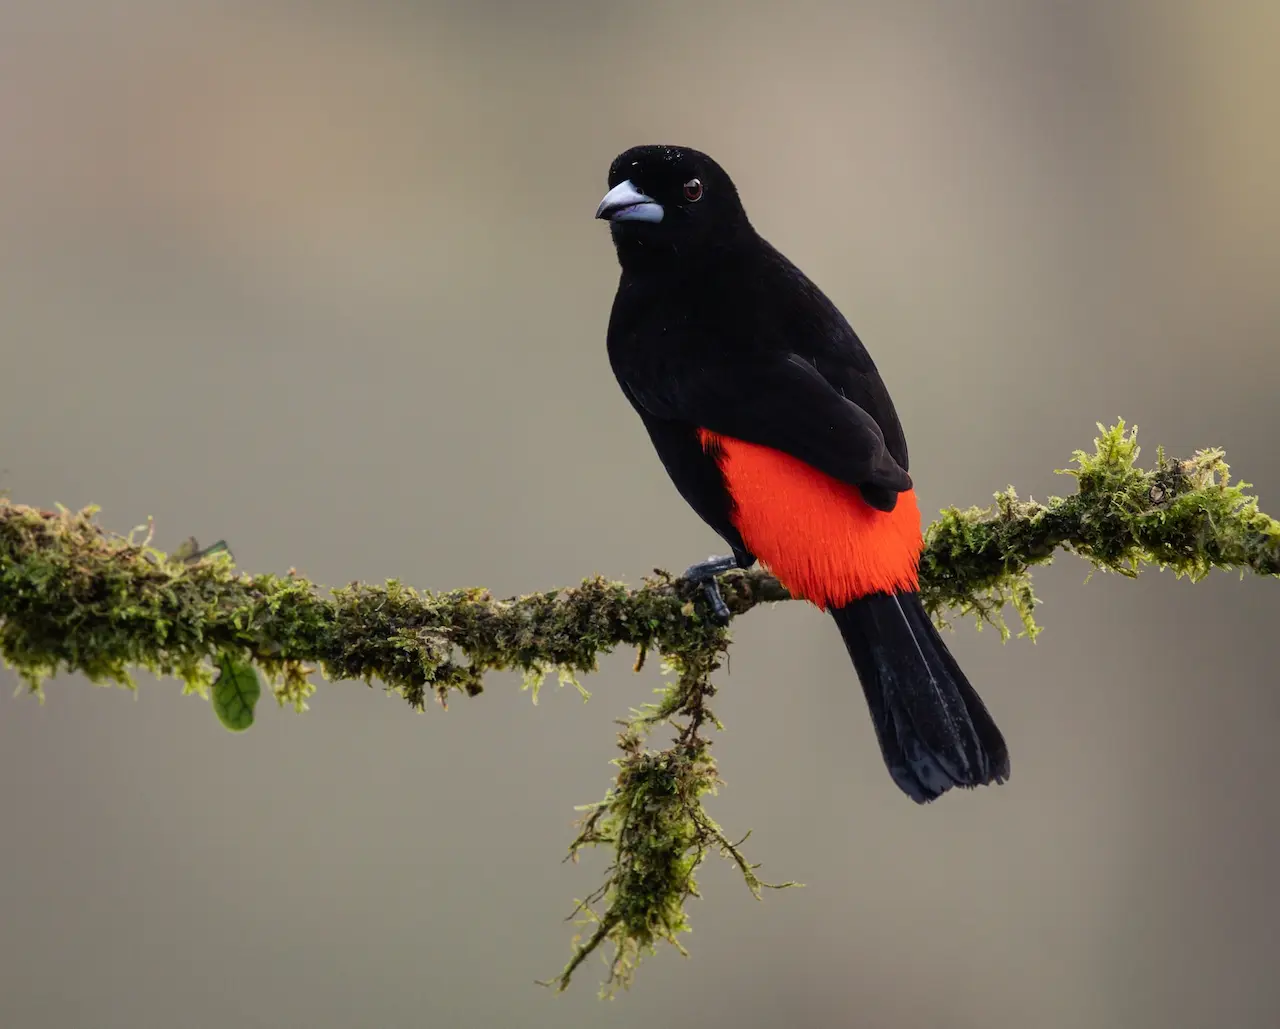 The Cherrie's Tanager Perched In The Branch Of A Wood